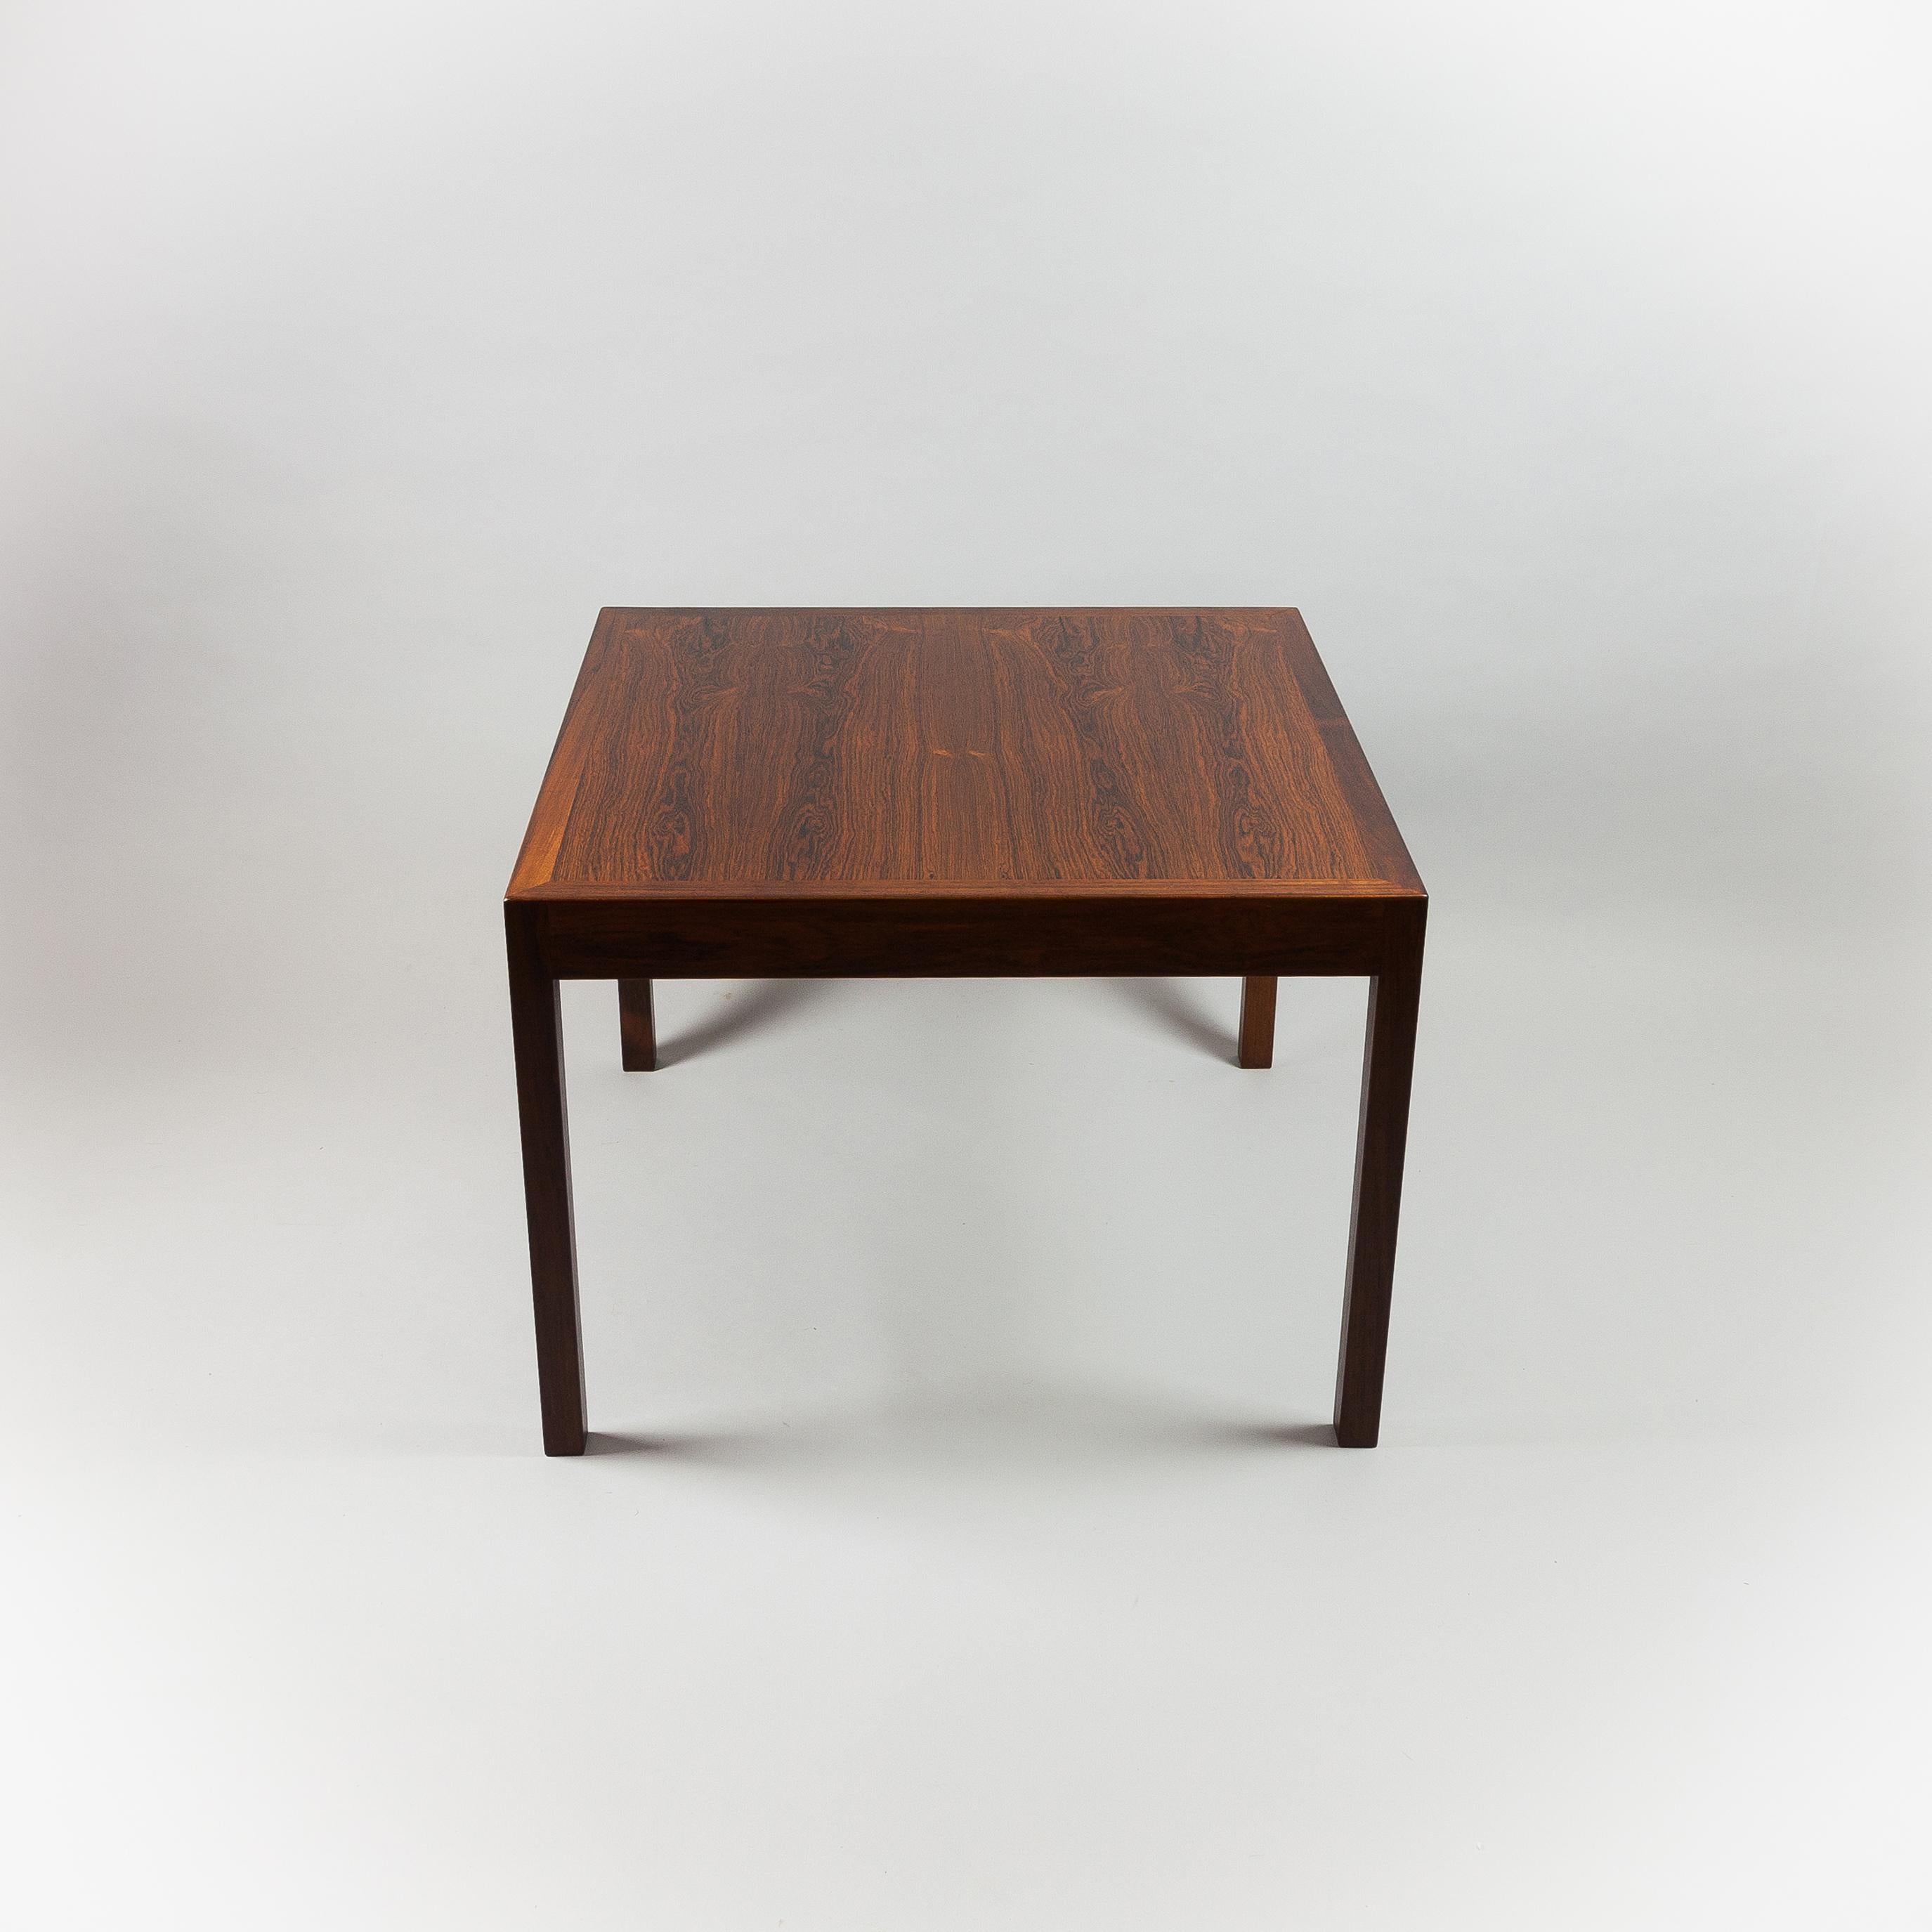 Square rosewood coffee table by Hans Wegner for Andreas Tuck. Fully restored with a beautiful patina. Denmark, 1960s.